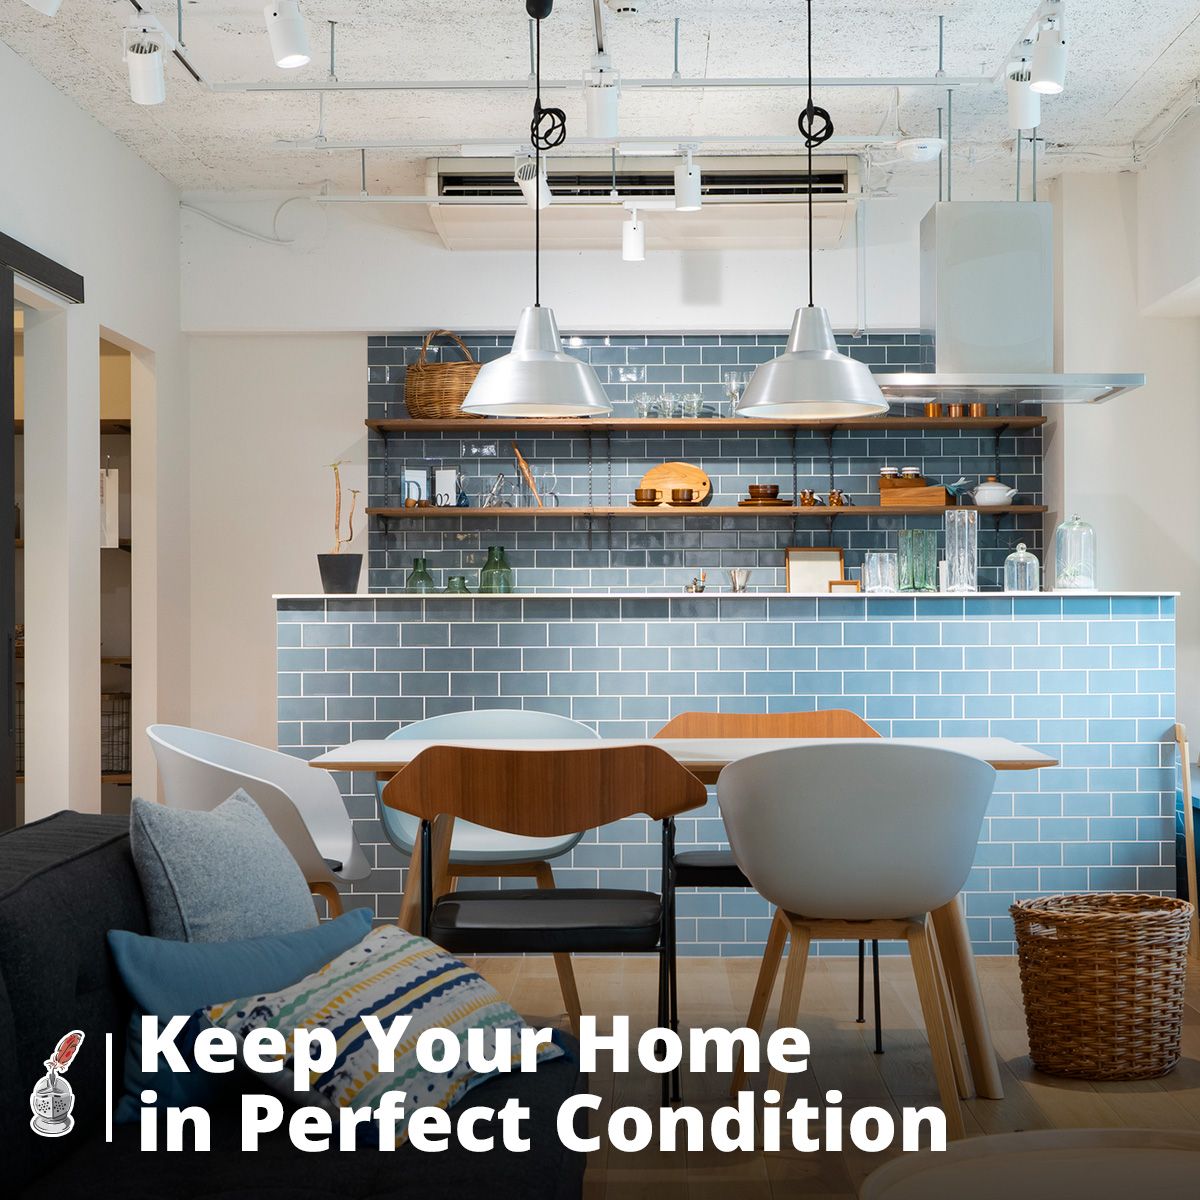 Keep Your Home in Perfect Condition